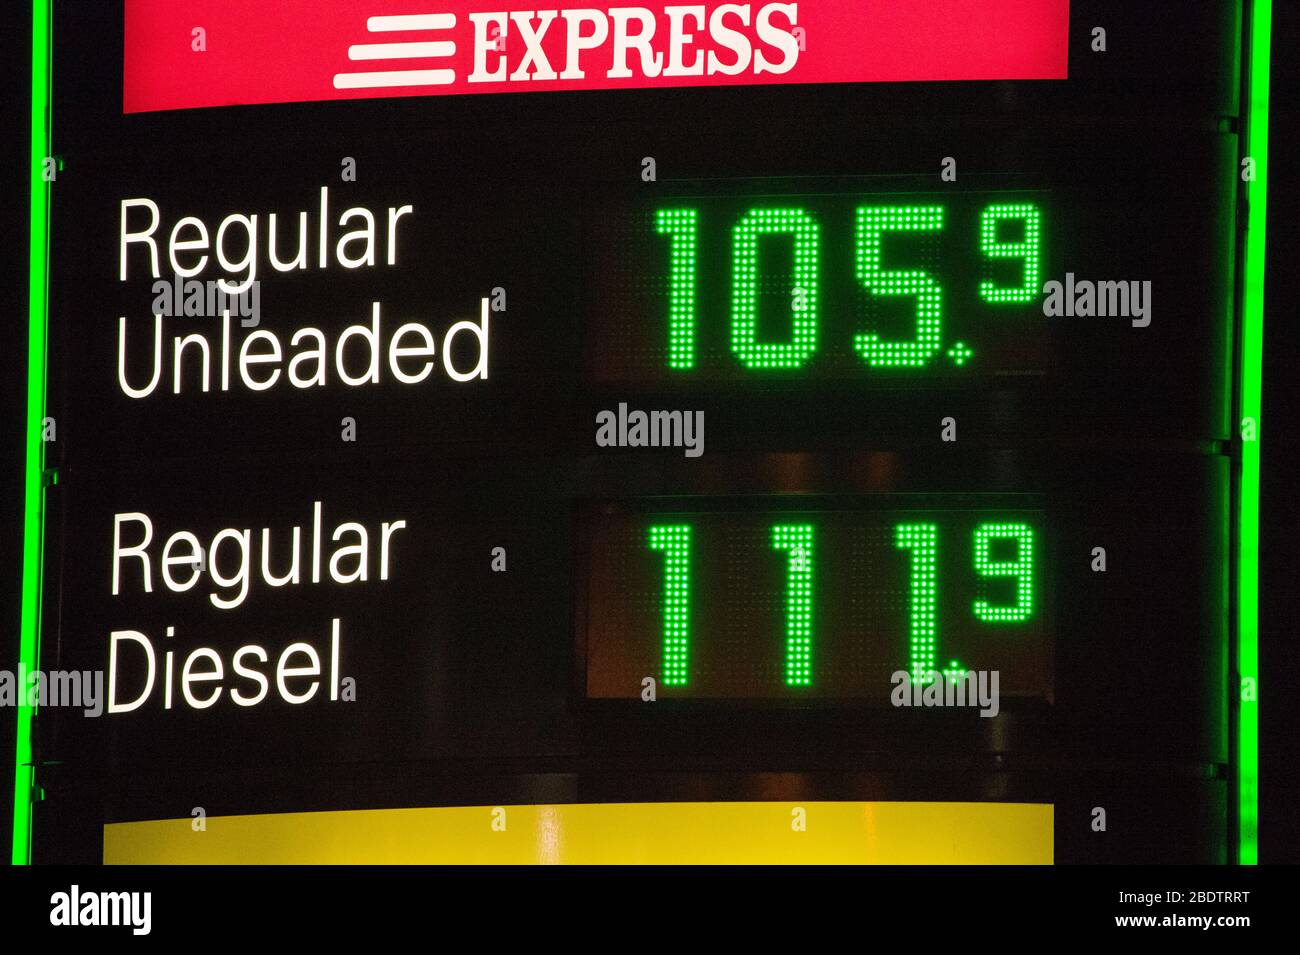 Cumbernauld, UK. 10th Apr, 2020. Pictured: Londis BP filling station: Unleaded 105.9 pence/litre Disel 111.9 pence/litre UK Petrol pump prices have plummeted almost £1.00 per litre due to the the Coronavirus (COVID-19) crisis lockdown which has forced people to stay at home. In March 2020 the price oil fell below US$25 per barrel. Credit: Colin Fisher/Alamy Live News Stock Photo